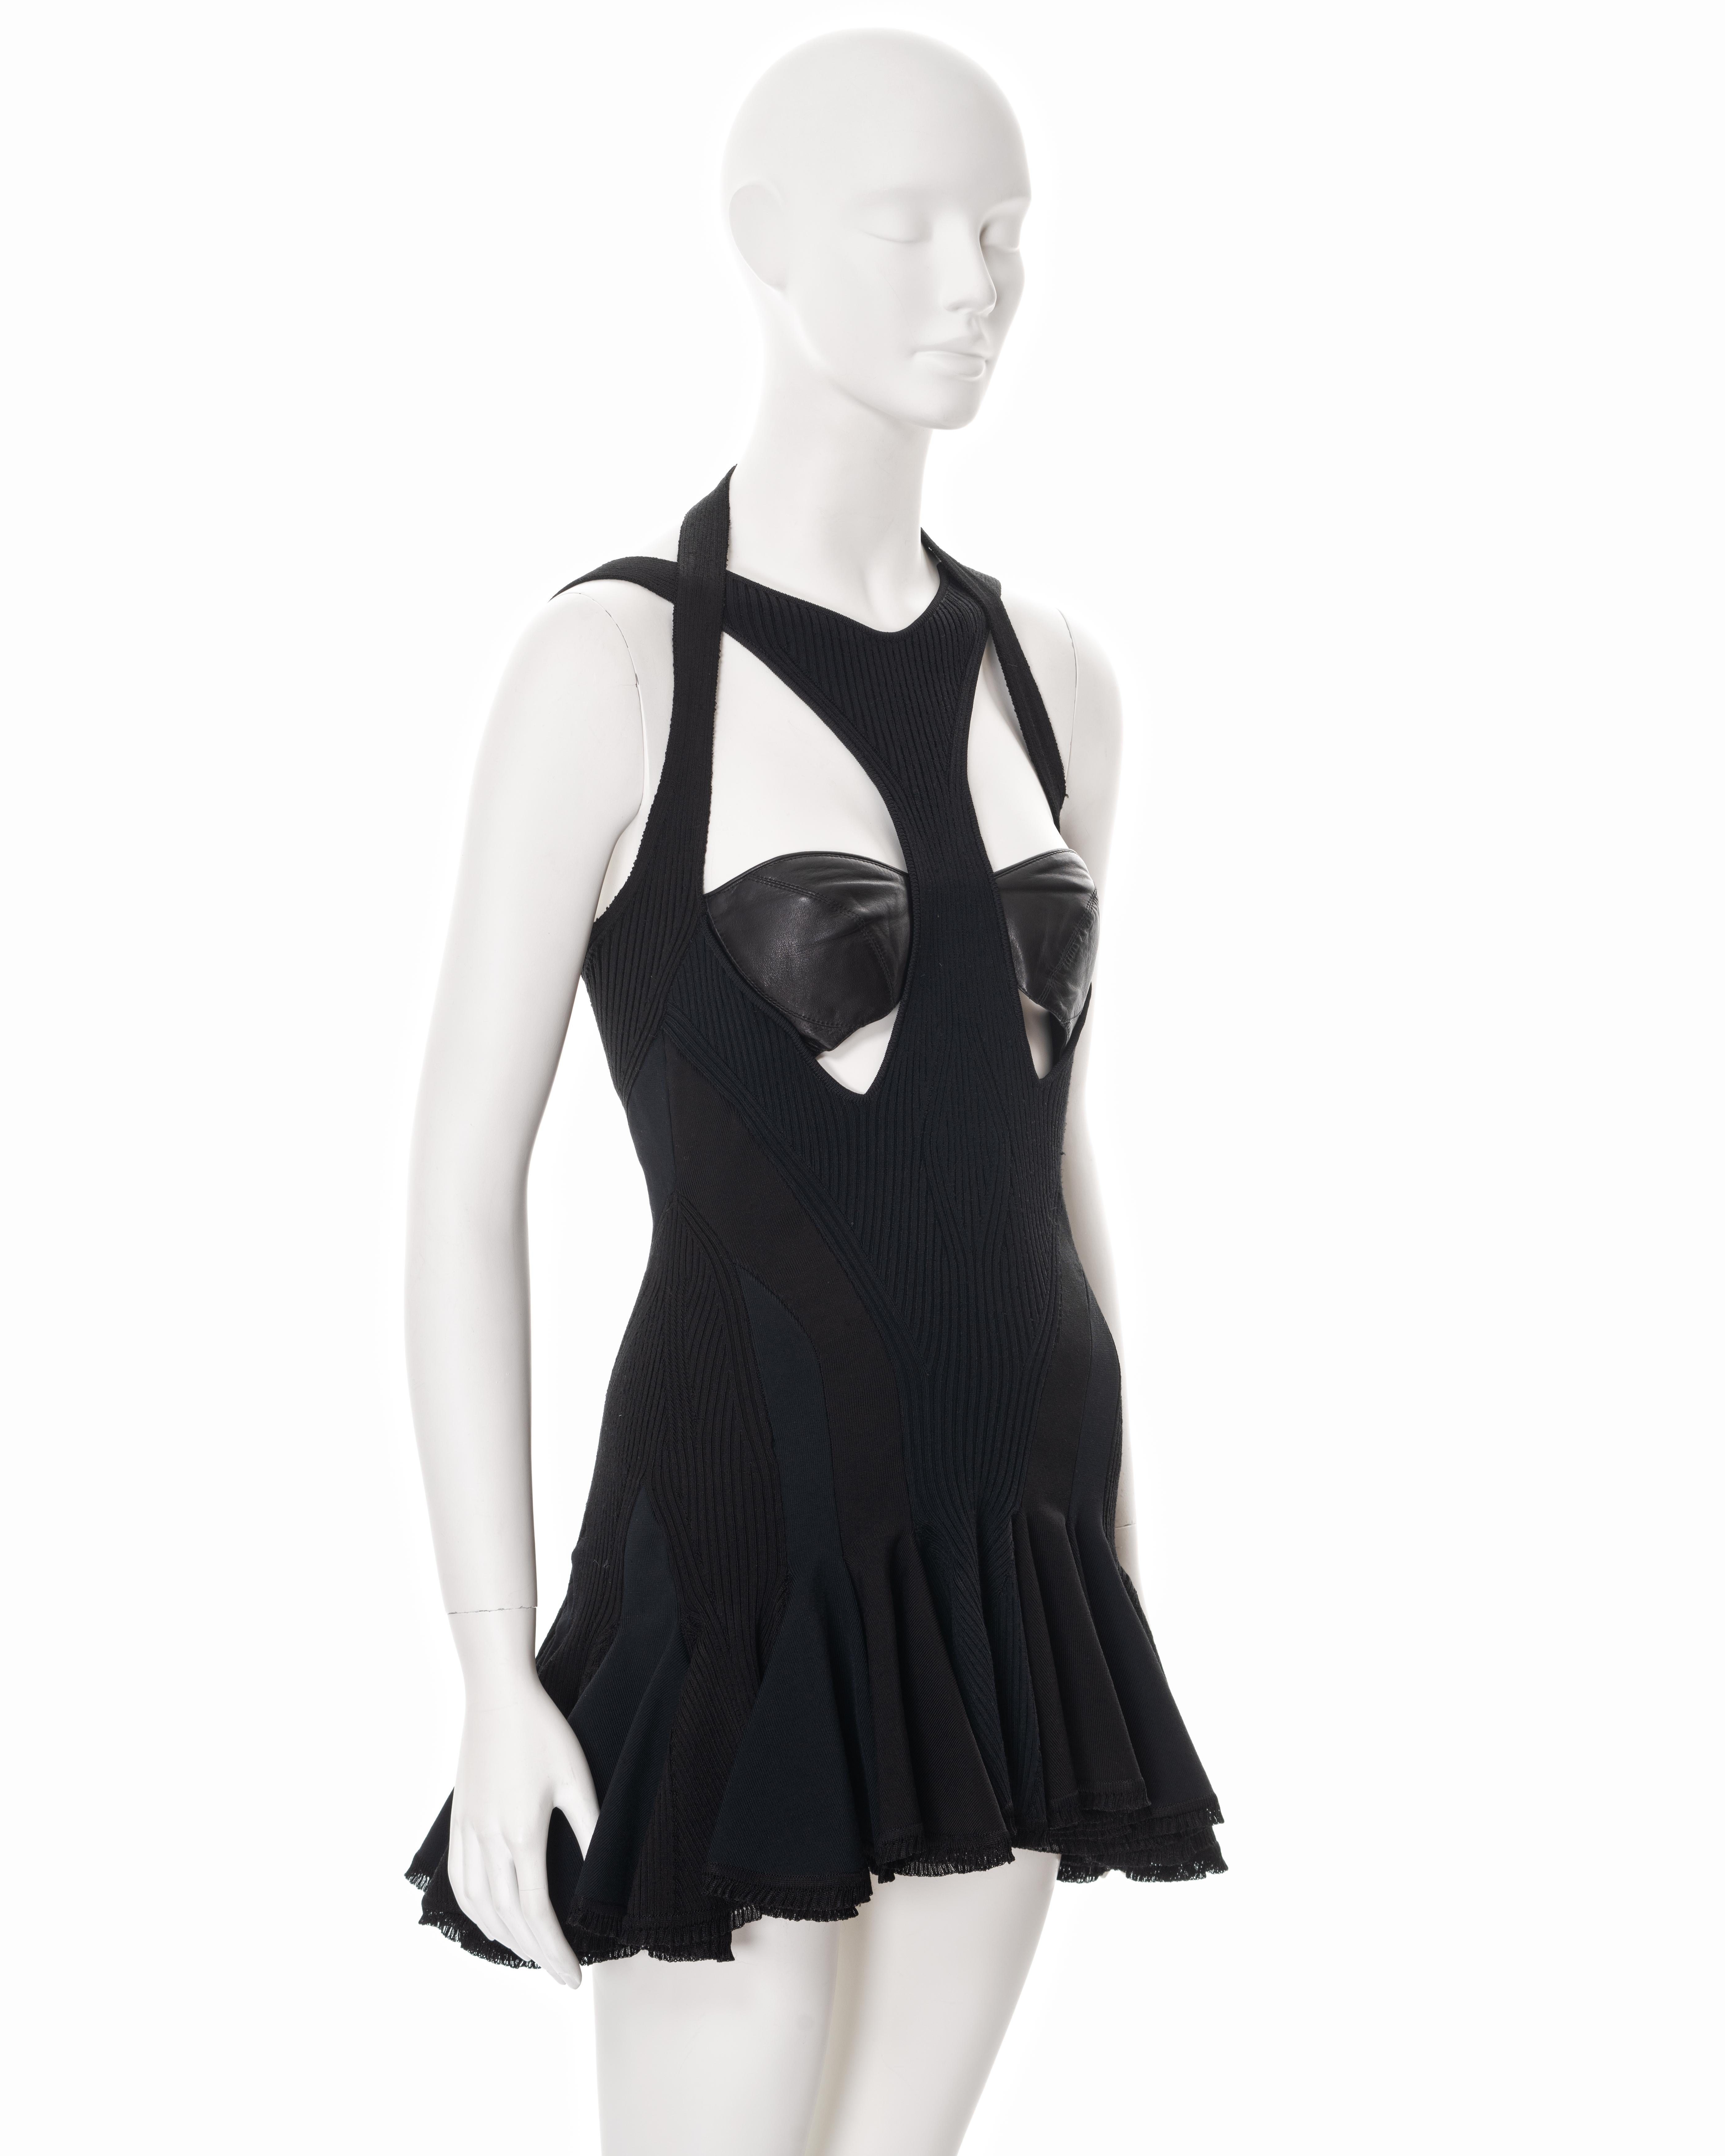 Women's Alexander McQueen black rib knit mini dress with leather bustier, ss 2004 For Sale